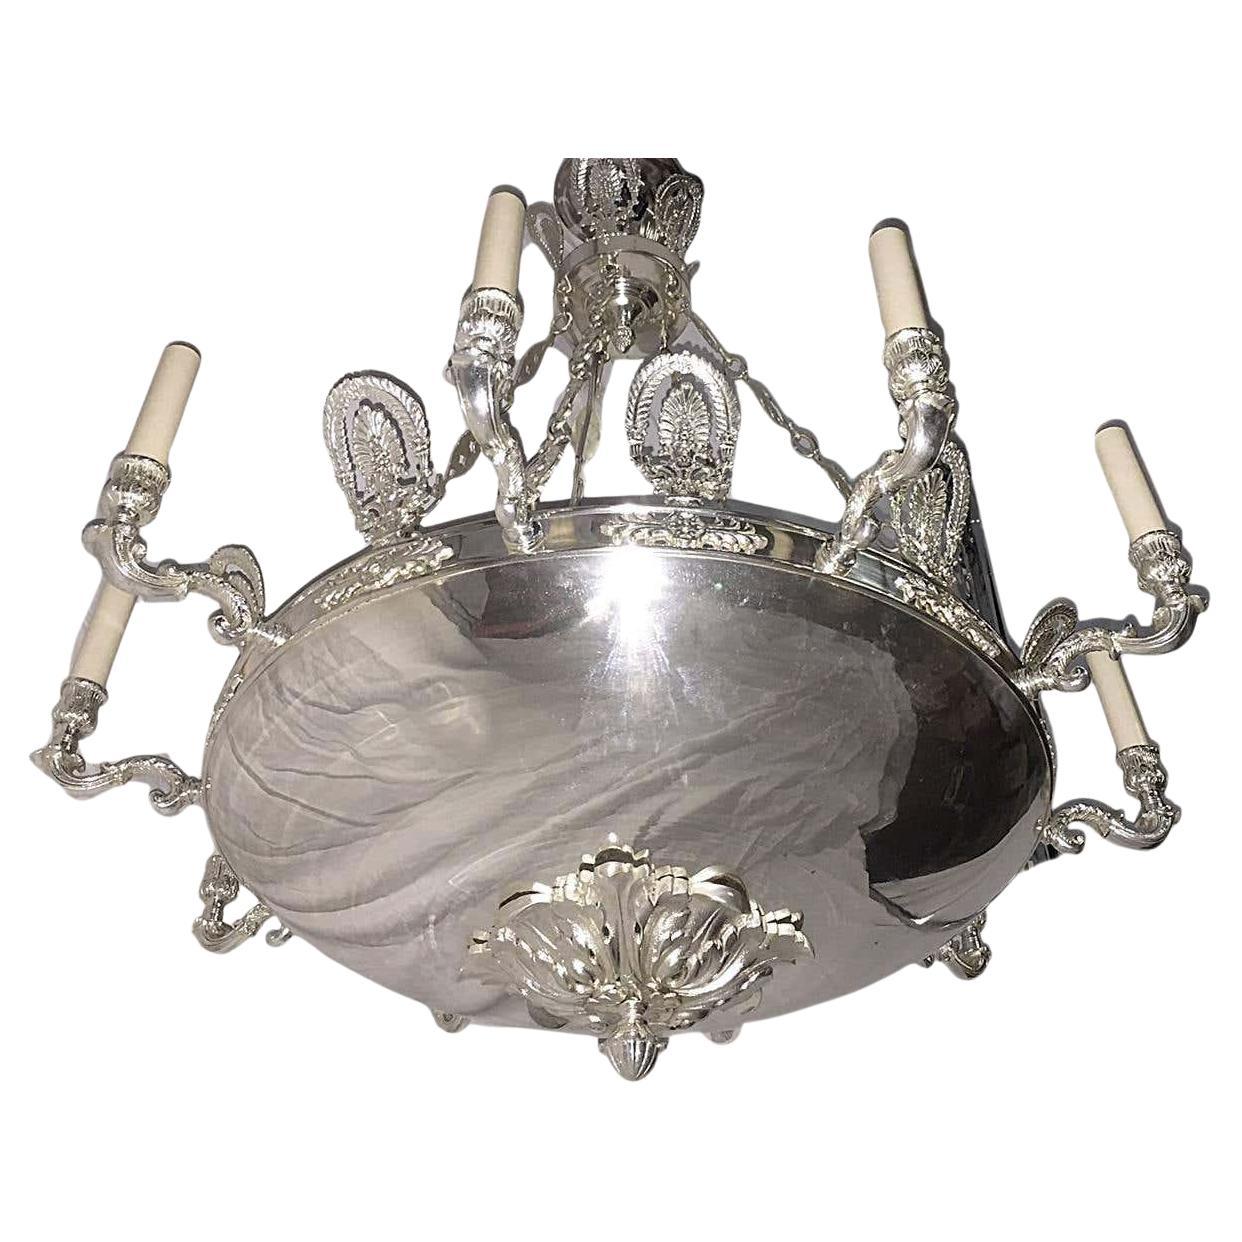 A French Empire-style circa 1920's silver-plated ten-arm chandelier.

Measurements:
Diameter: 32